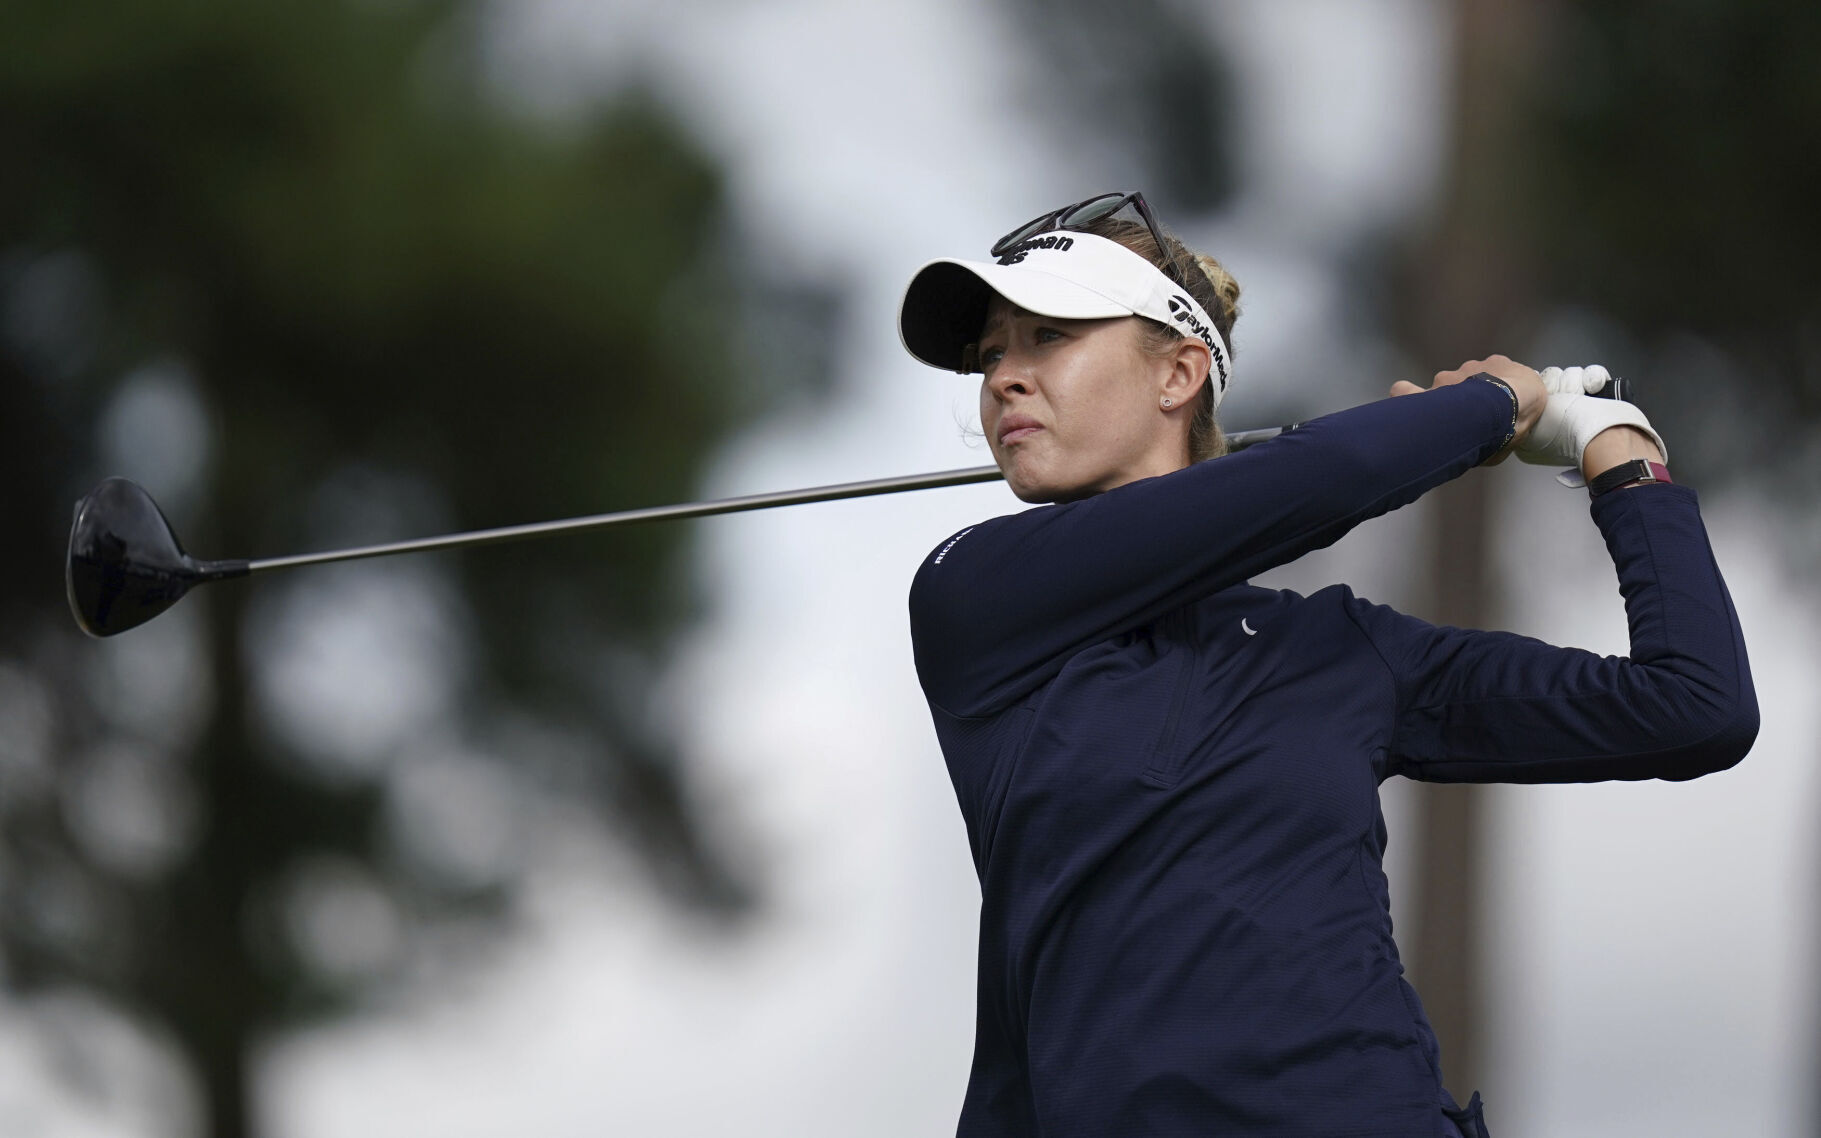 Ally Ewing takes five shot lead at Women's British Open